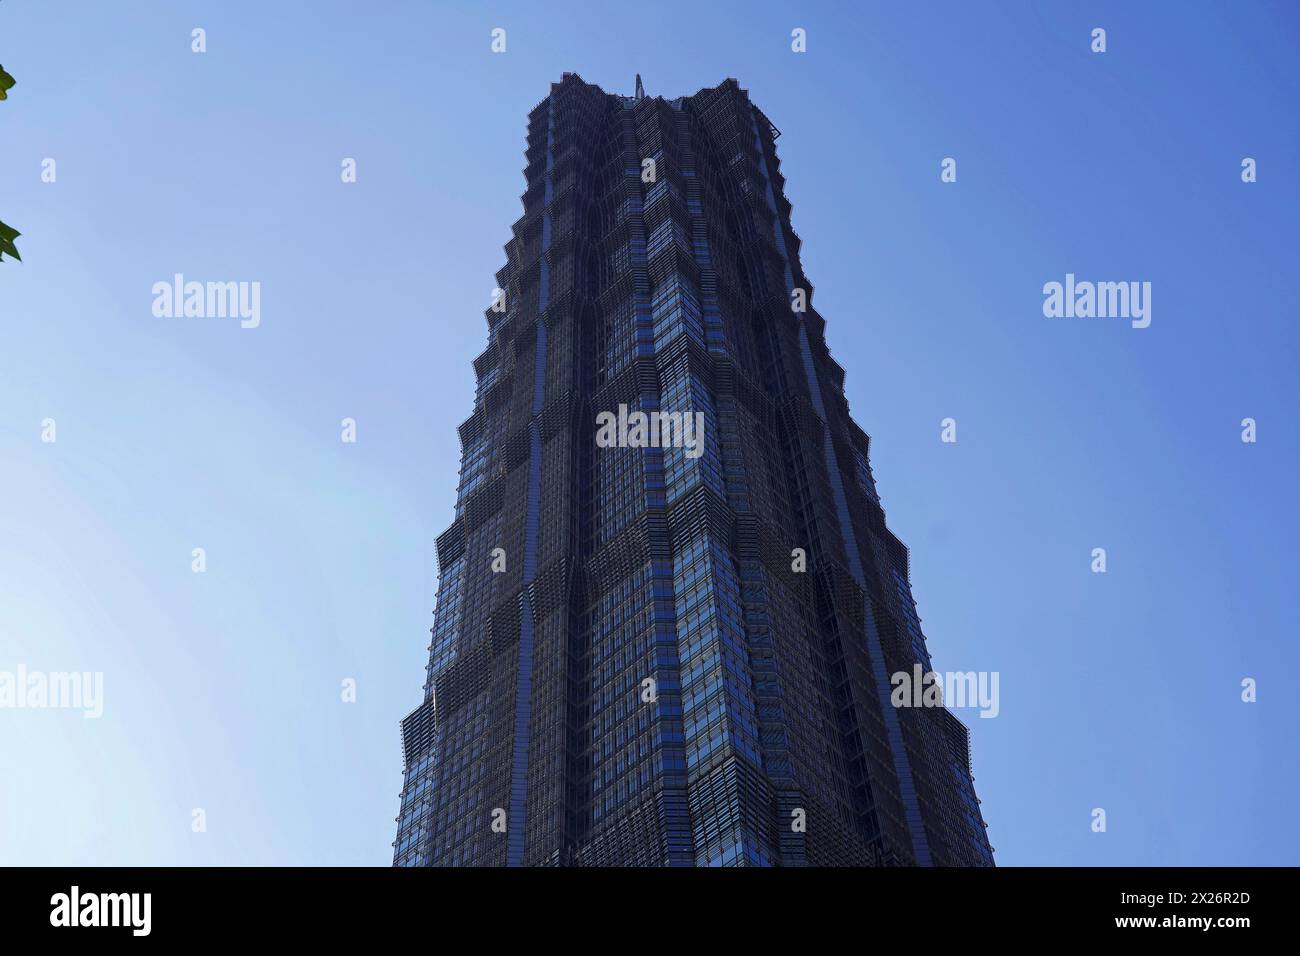 The facade of a geometrically designed skyscraper stands out against the blue sky, Shanghai, China Stock Photo